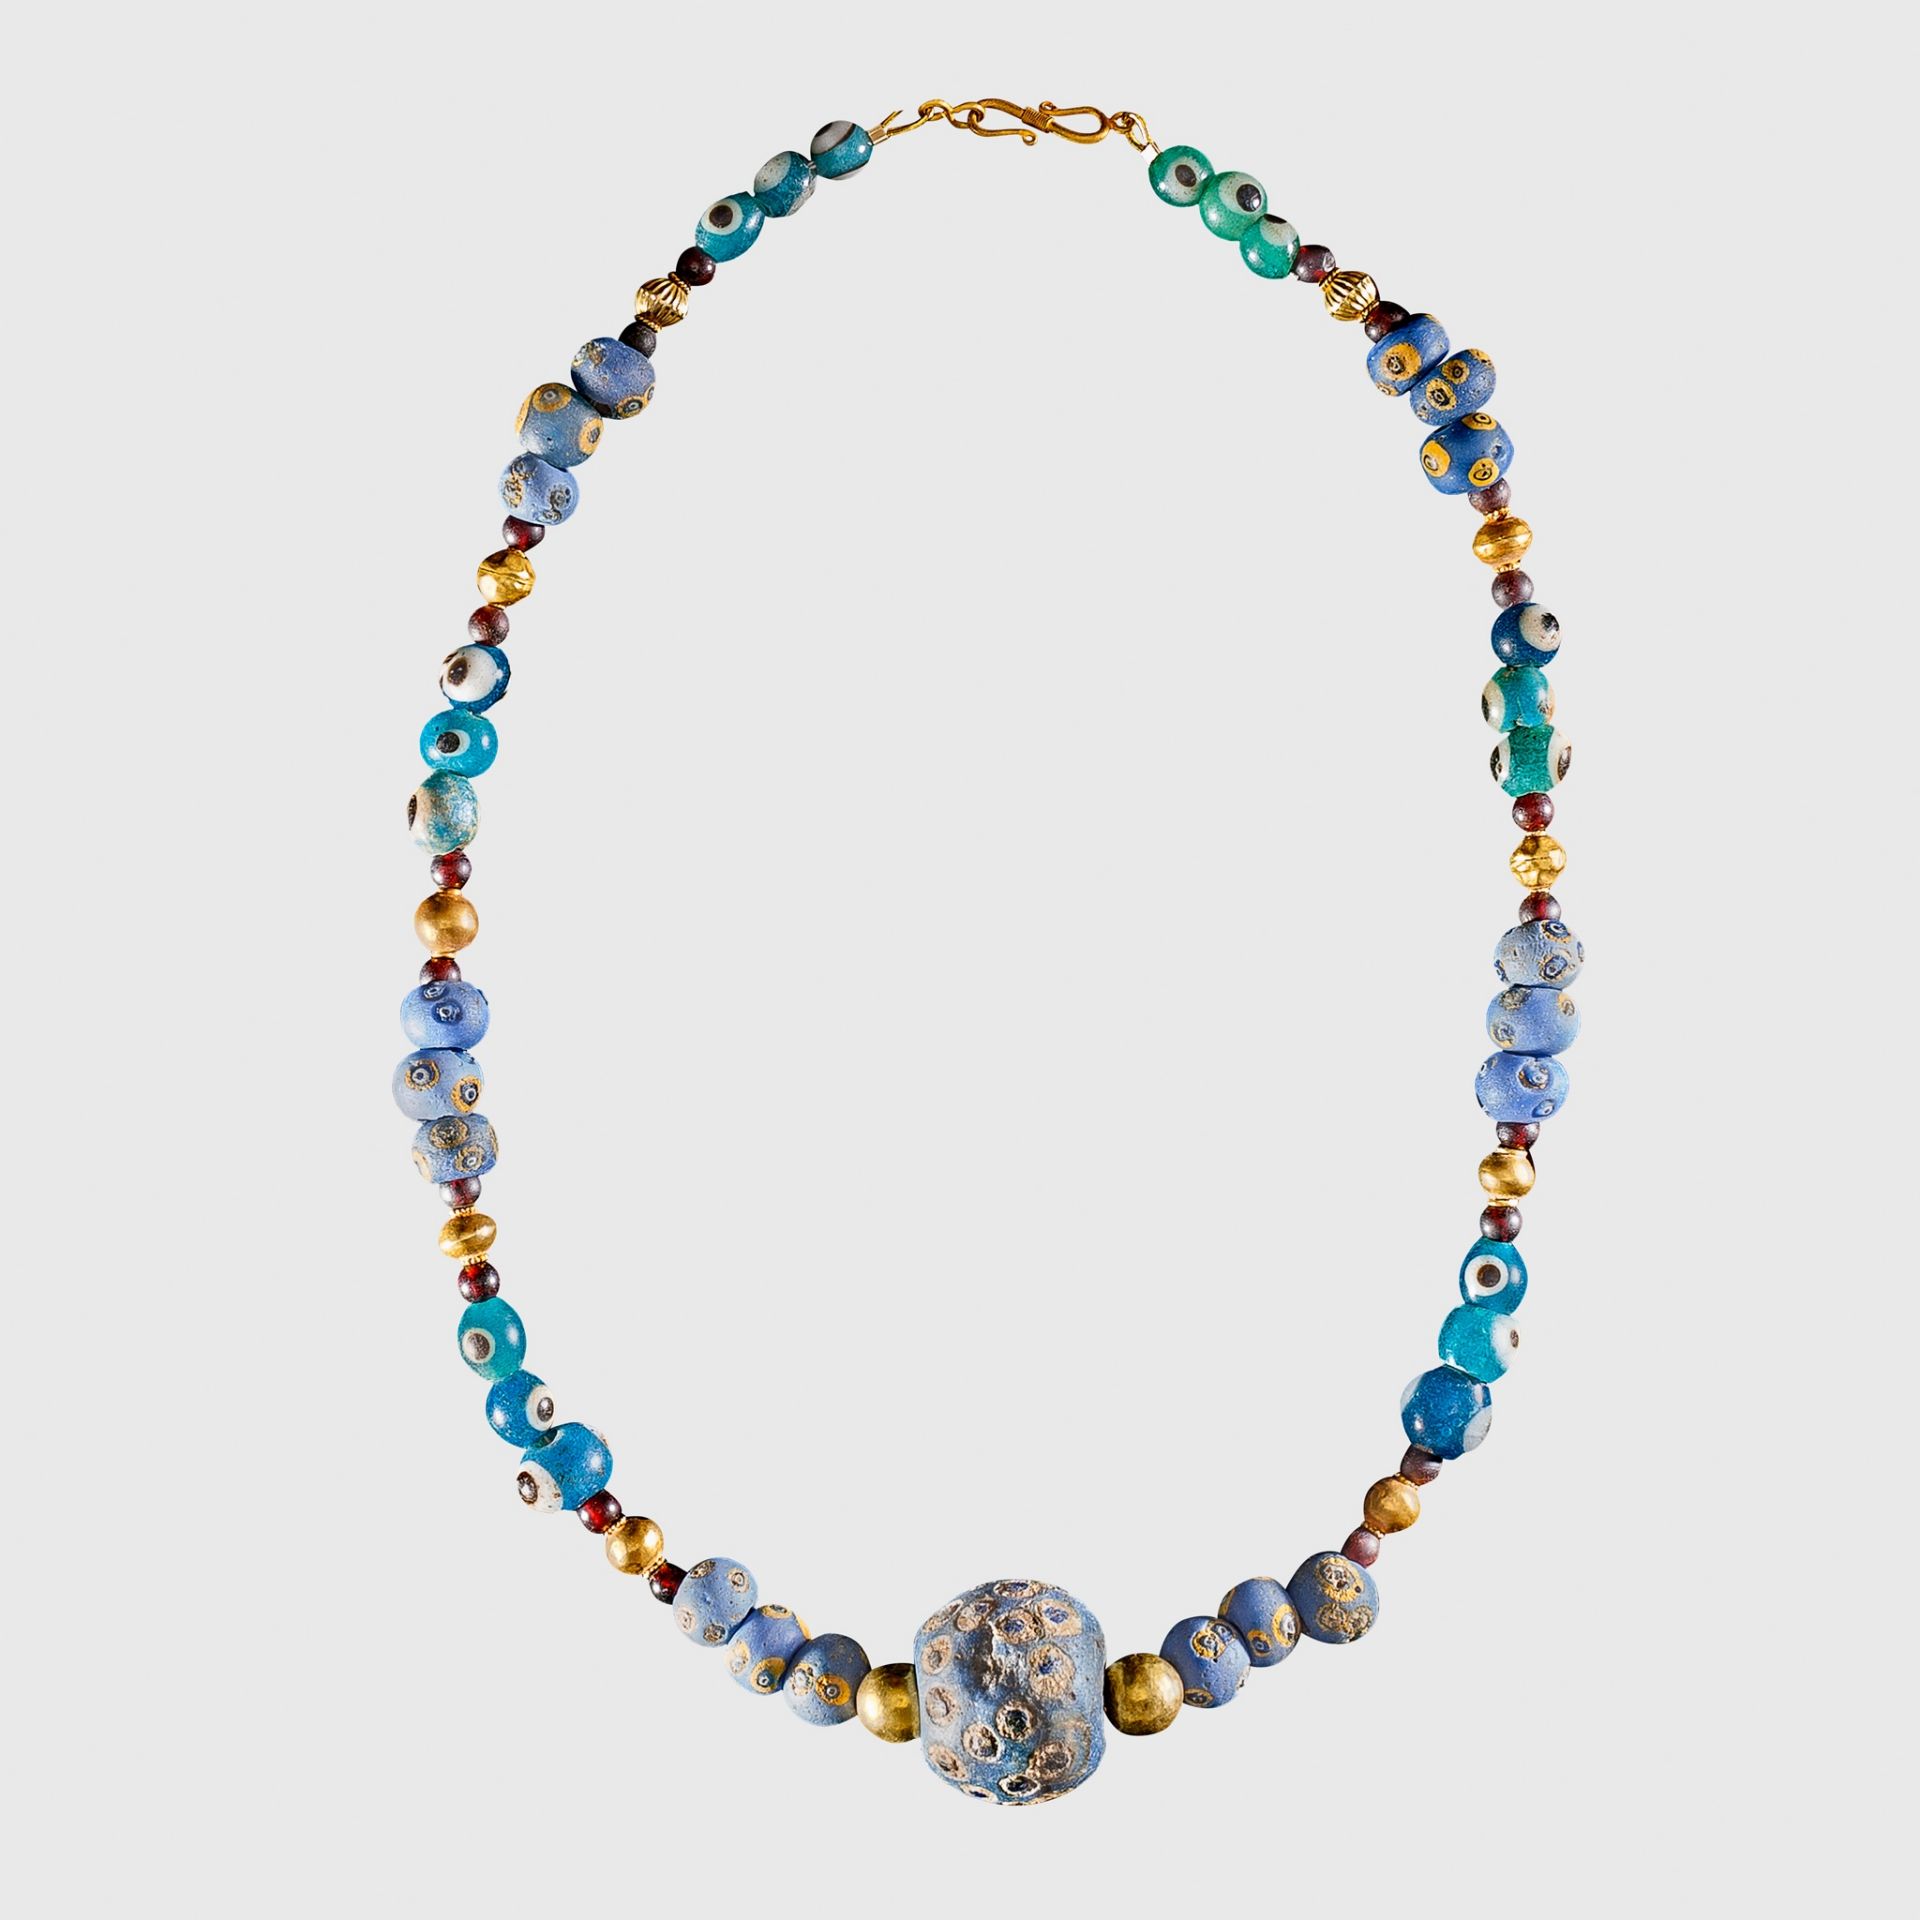 PHOENICIAN EYE GLASS AND GOLD BEAD NECKLACE NEAR EAST, C. 7TH CENTURY B.C.